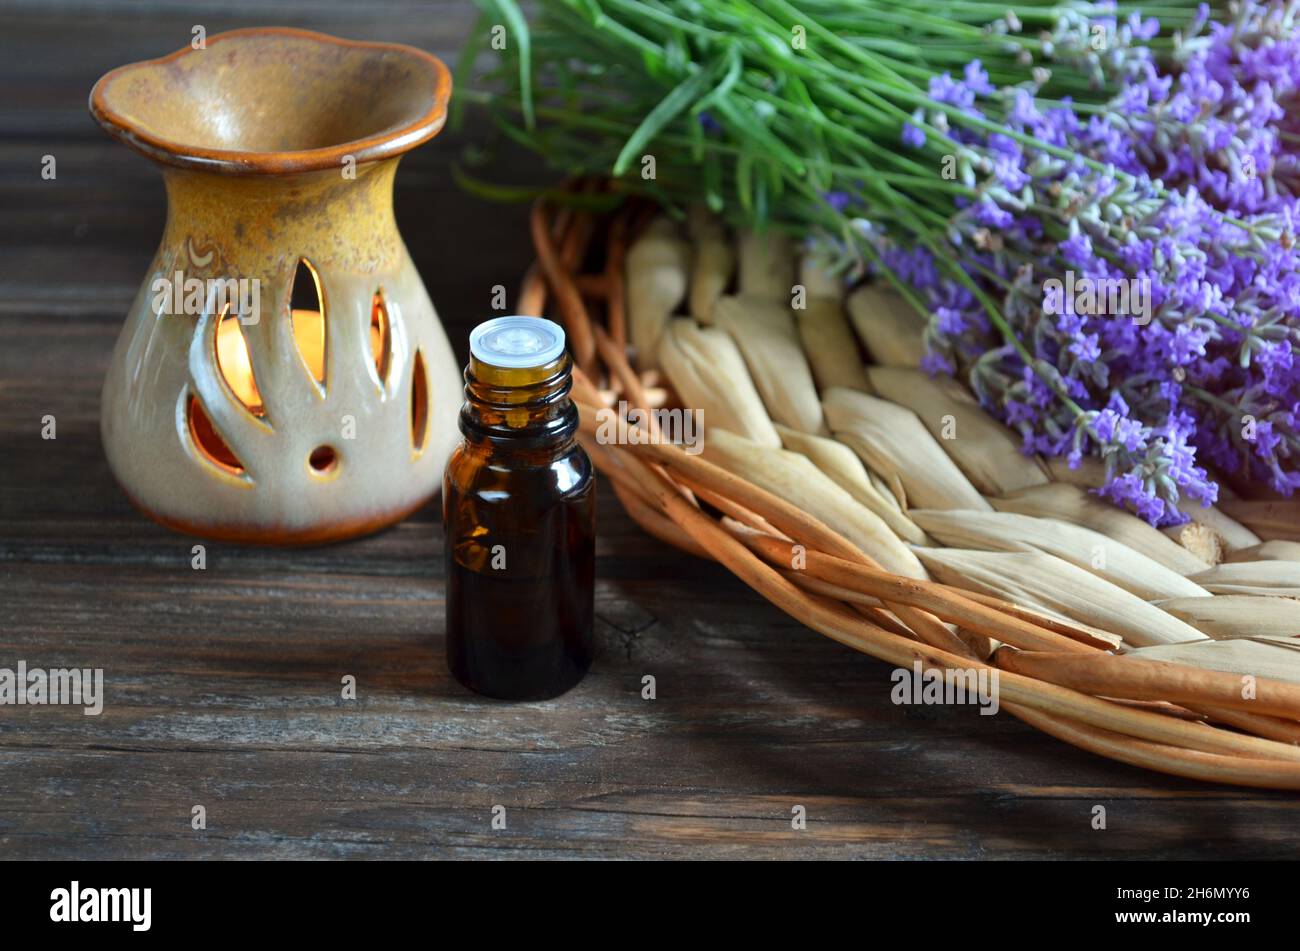 Fresh lavender flowers with essential oil bottle and a lamp for aromatic oils on a wooden table. Aromatherapy and spa concept. Stock Photo